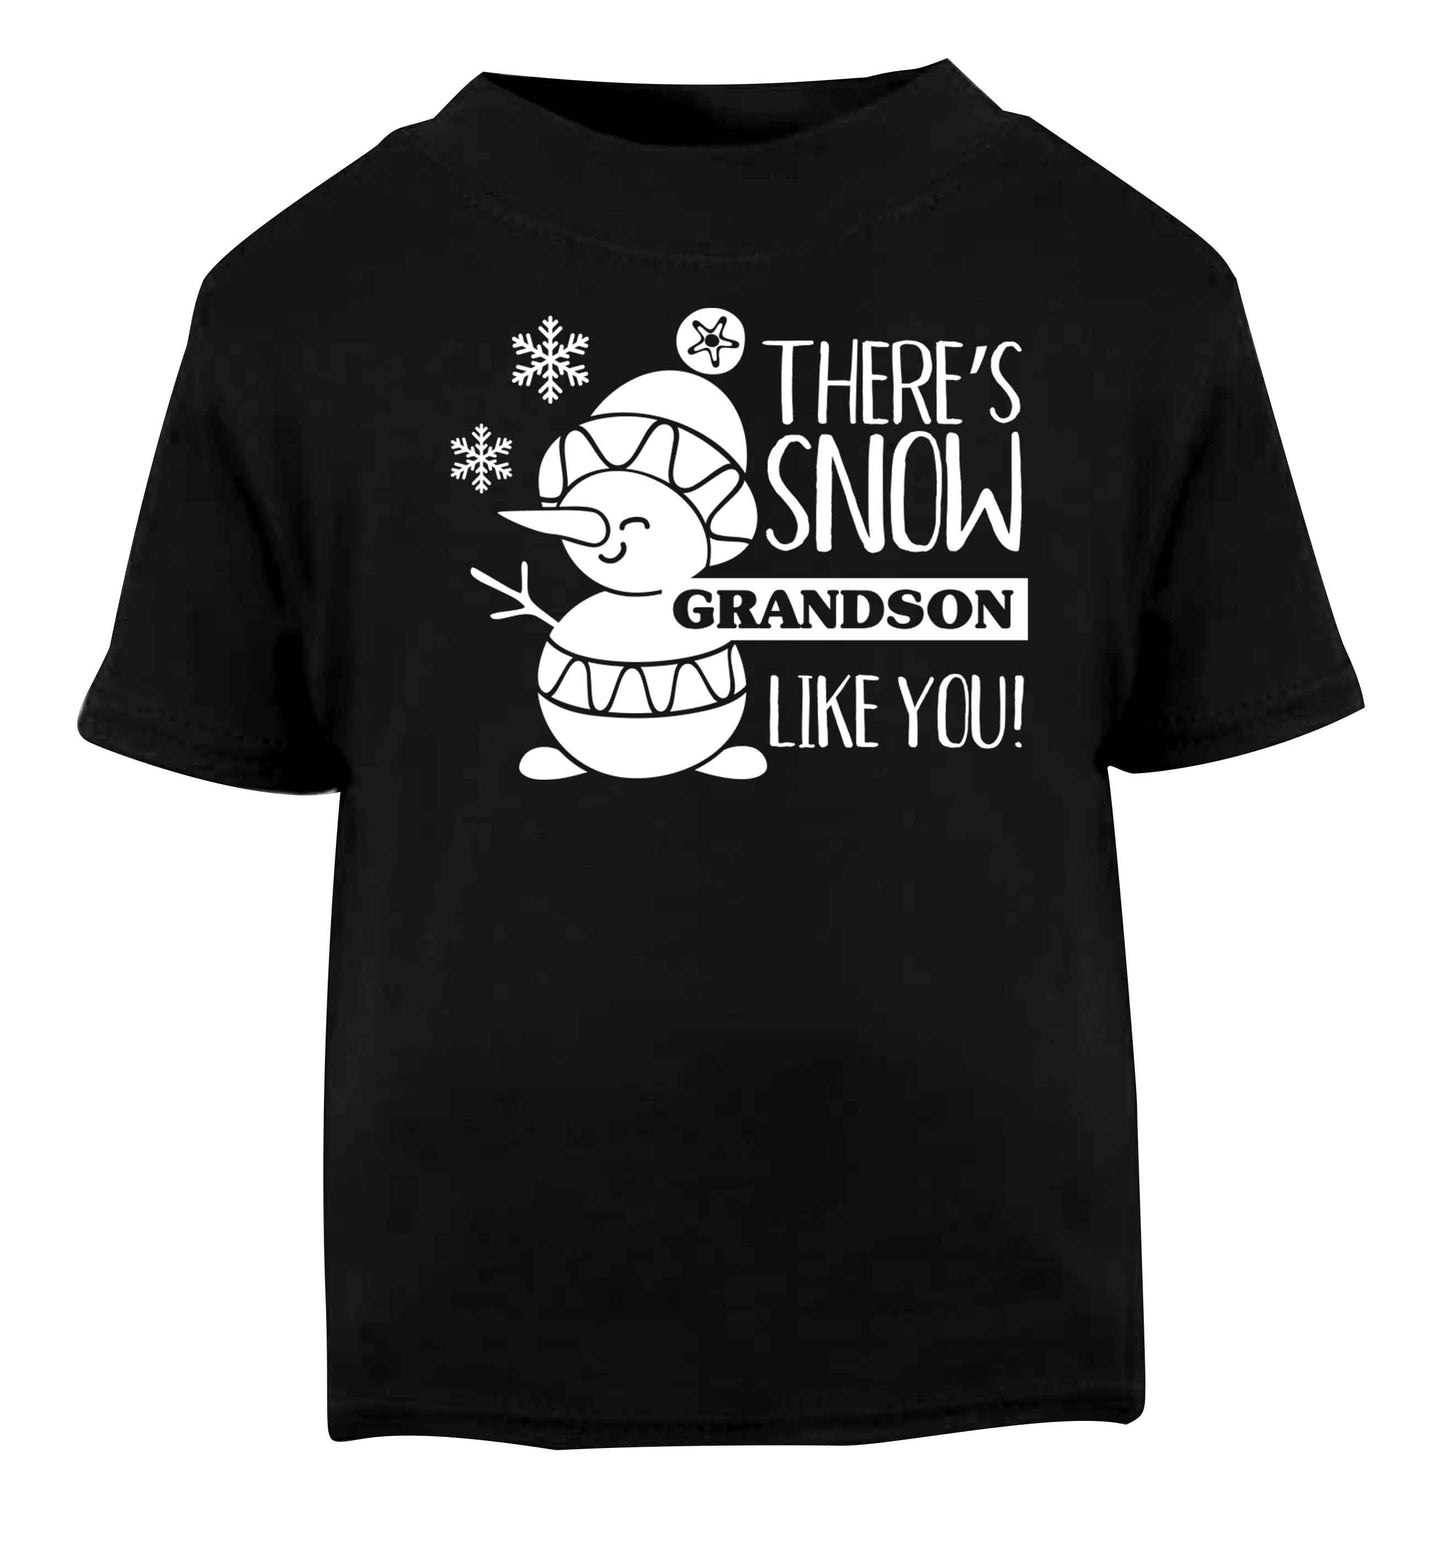 There's snow grandson like you Black baby toddler Tshirt 2 years